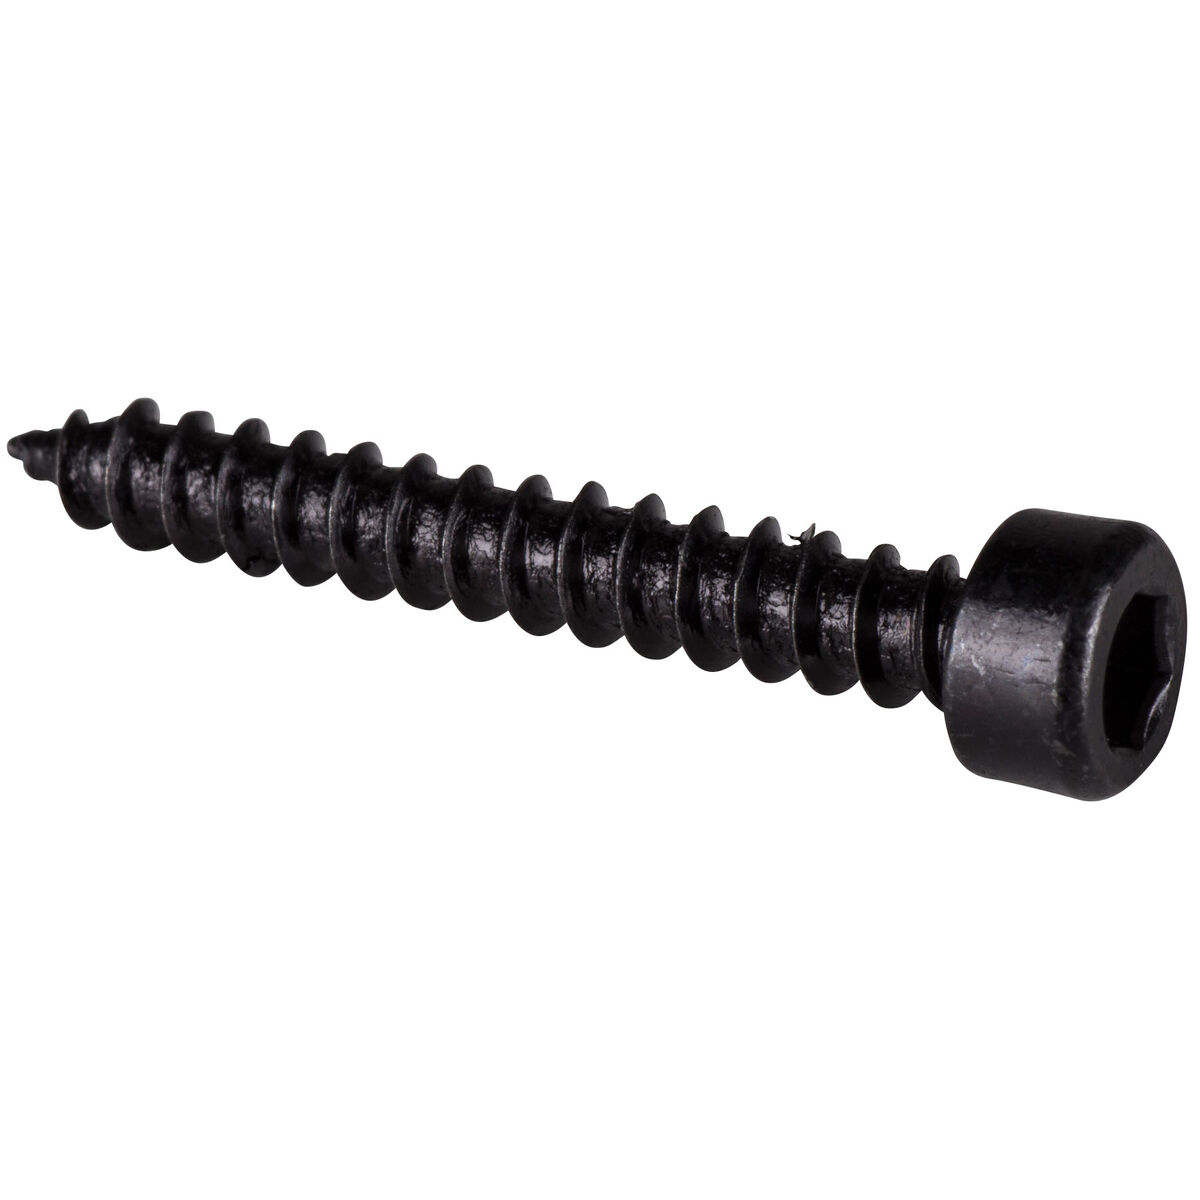 Details about   Solid Brass Wood Screw M3 M4 M5 Countersunk Head Cross Drive Tapping Screw